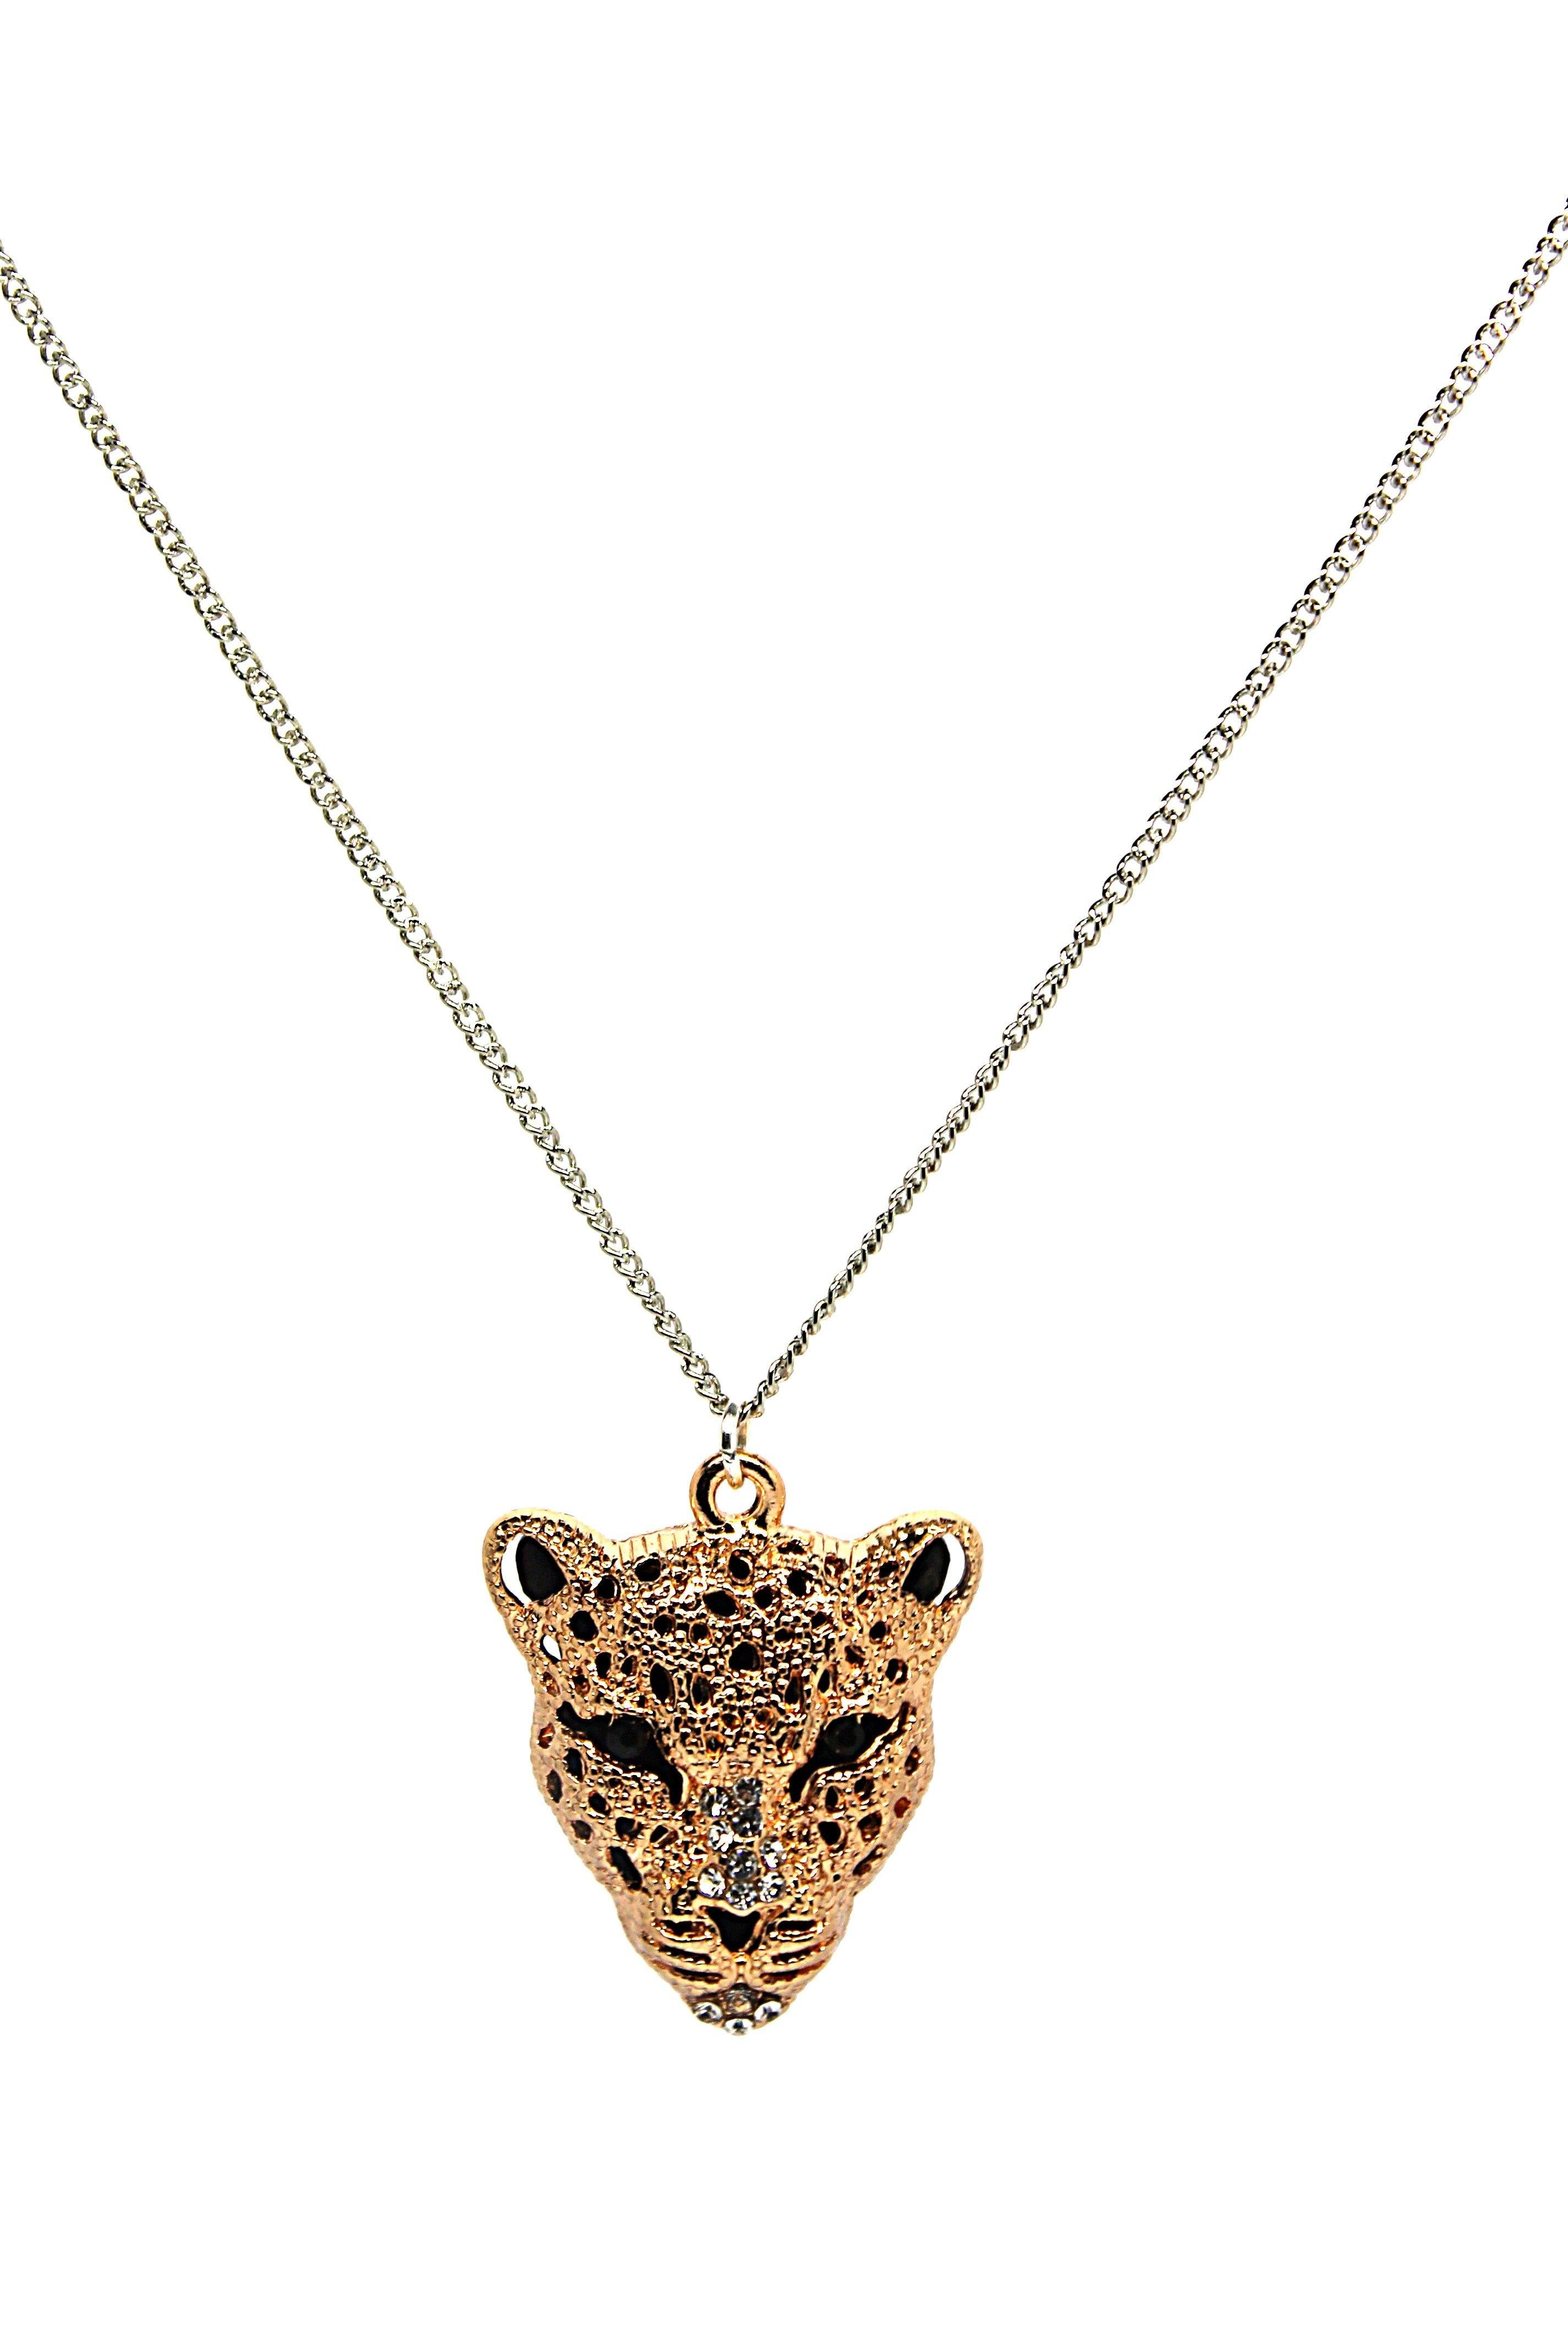 Leopard Necklace - Wildtouch - Wildtouch